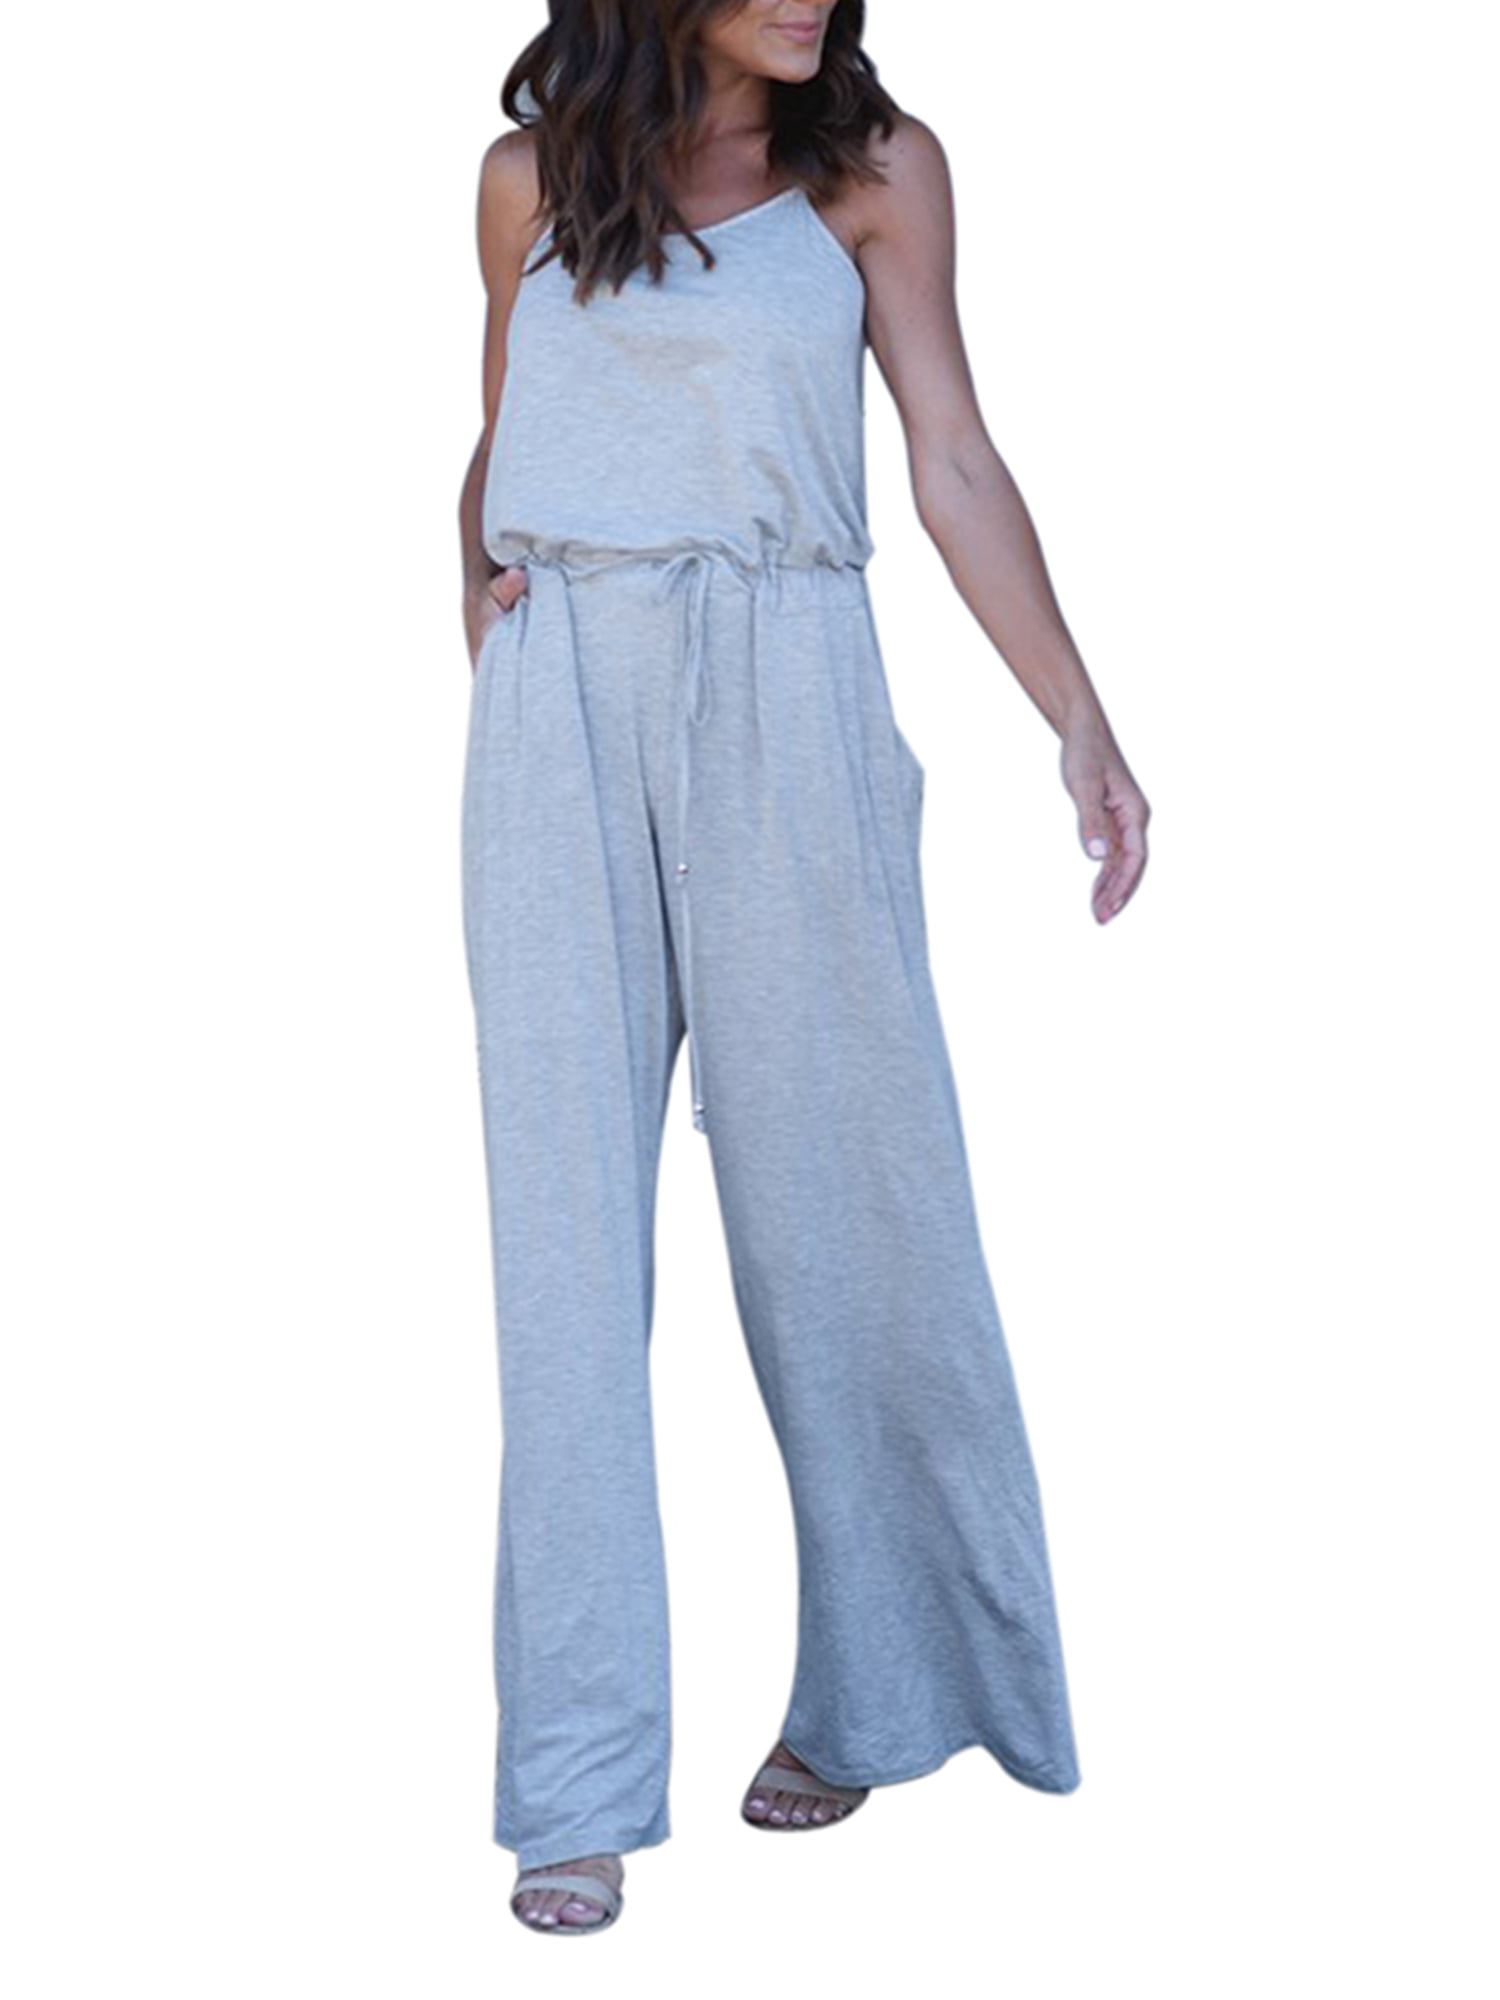 Lady Sleeveless Loose Wide Leg Jumpsuit Overalls Summer Casual Trousers Romper 